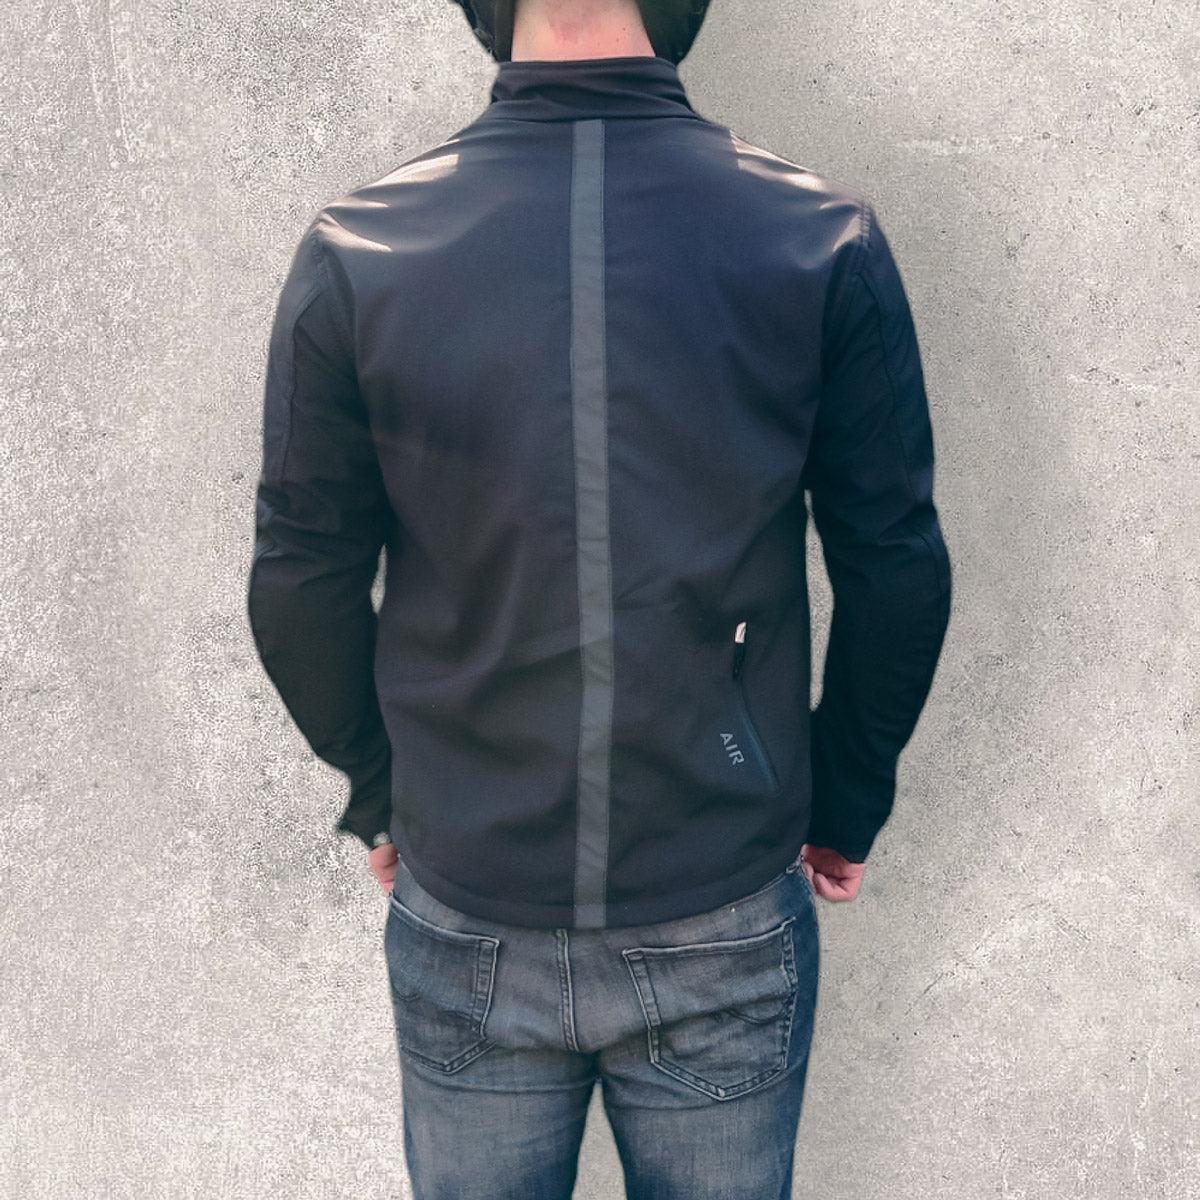 Rapha Commuter Jacket review: Style, but not without substance